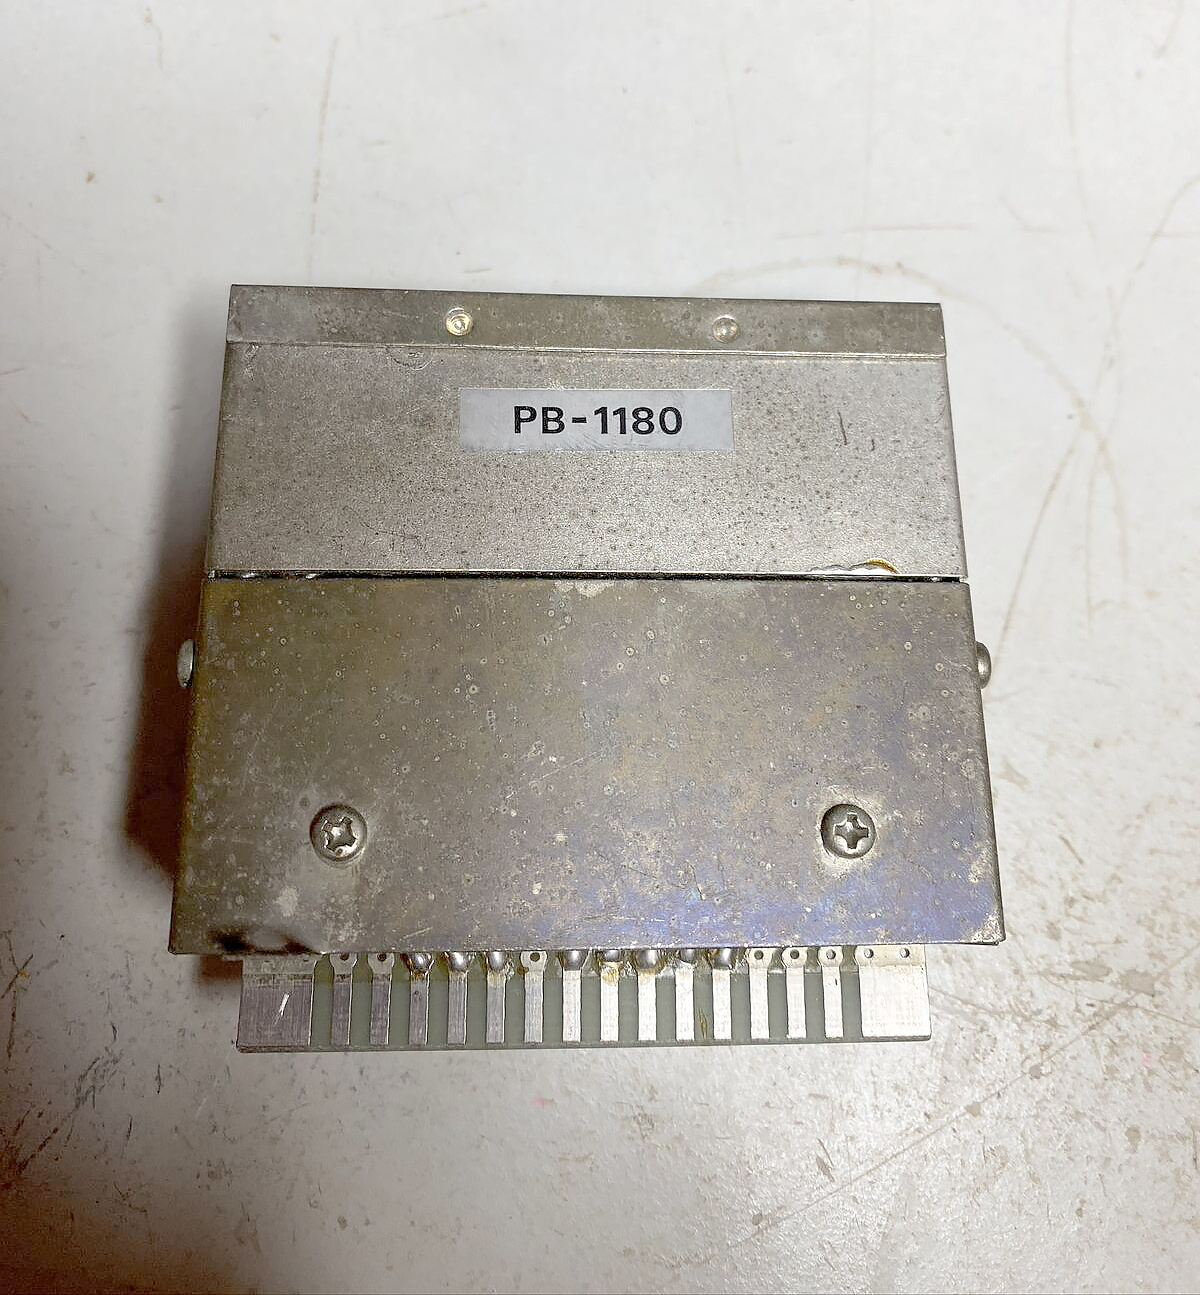 A more recognised view of the PB-1180 High Frequency IF Module